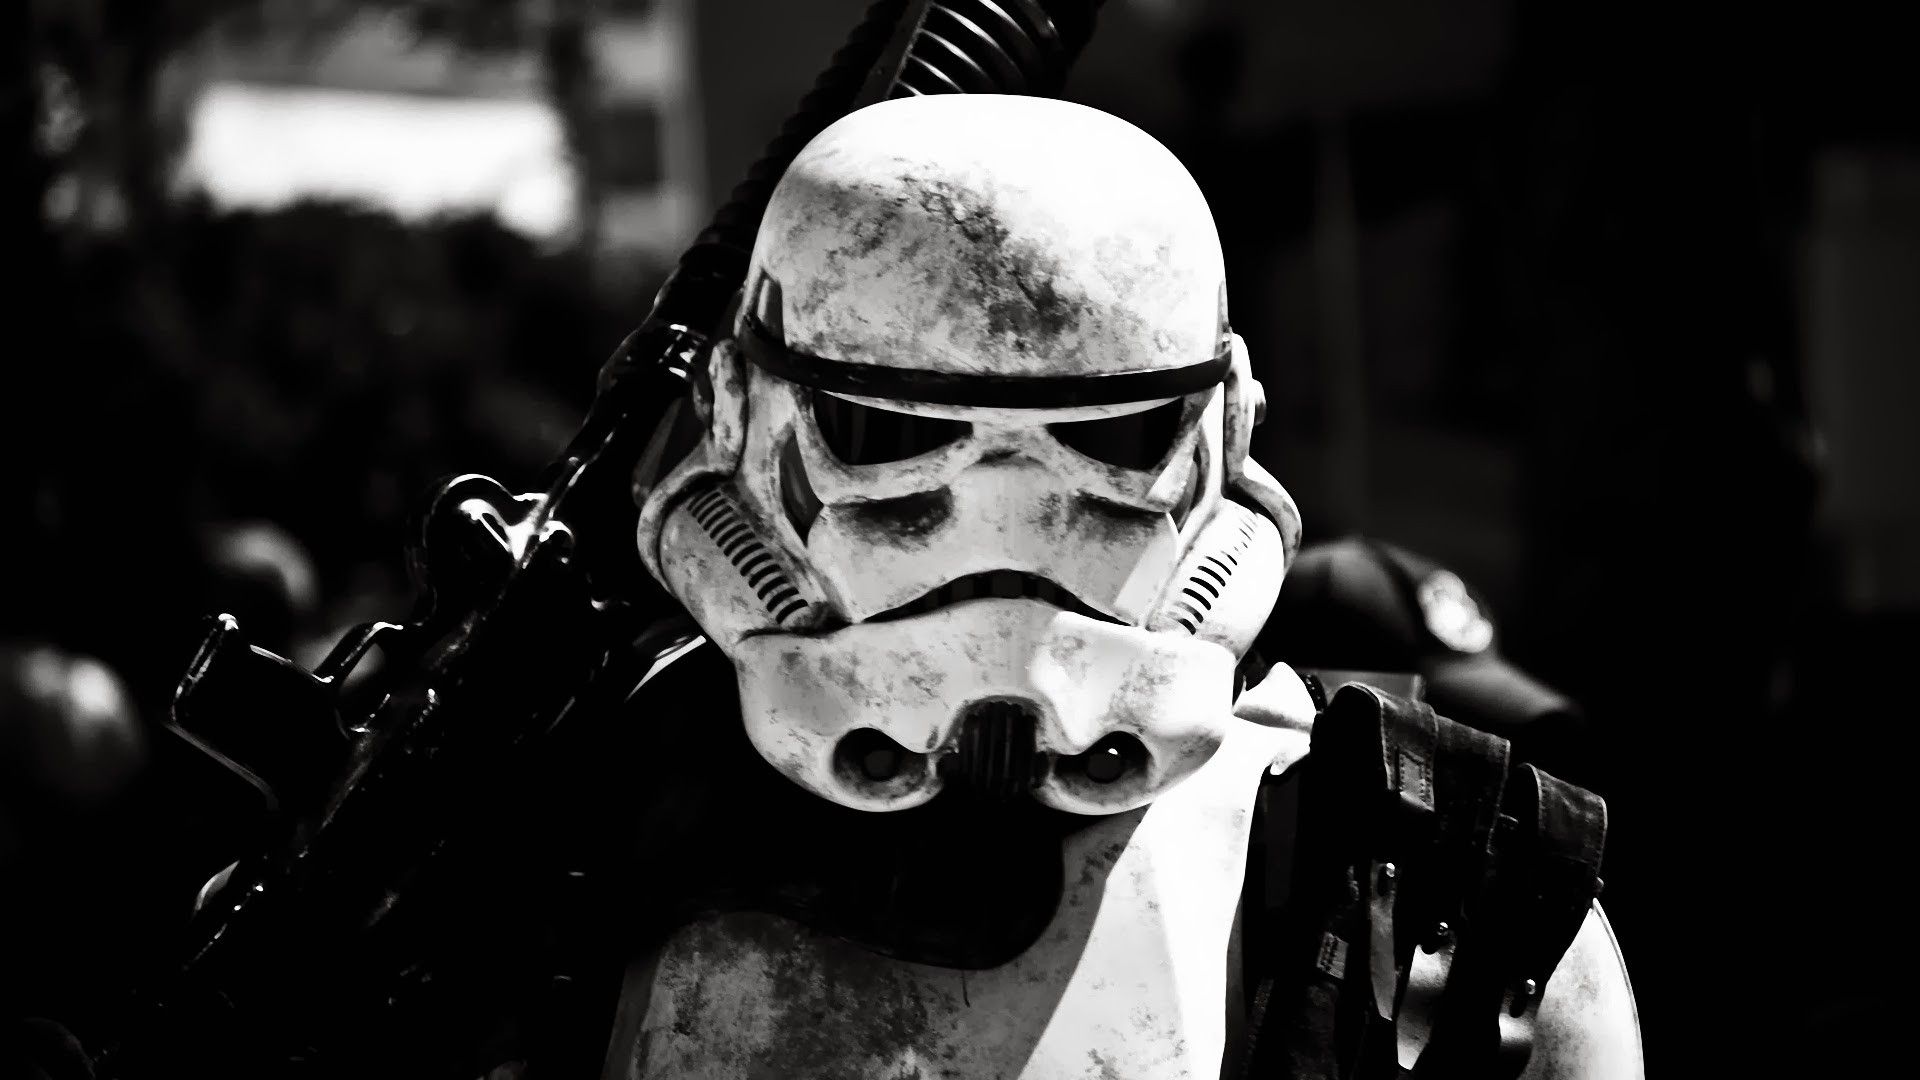 Wallpaper, Star Wars, soldier, helmet, science fiction, dirt, stormtrooper, Galactic Empire, photograph, darkness, black and white, monochrome photography, film noir 1920x1080